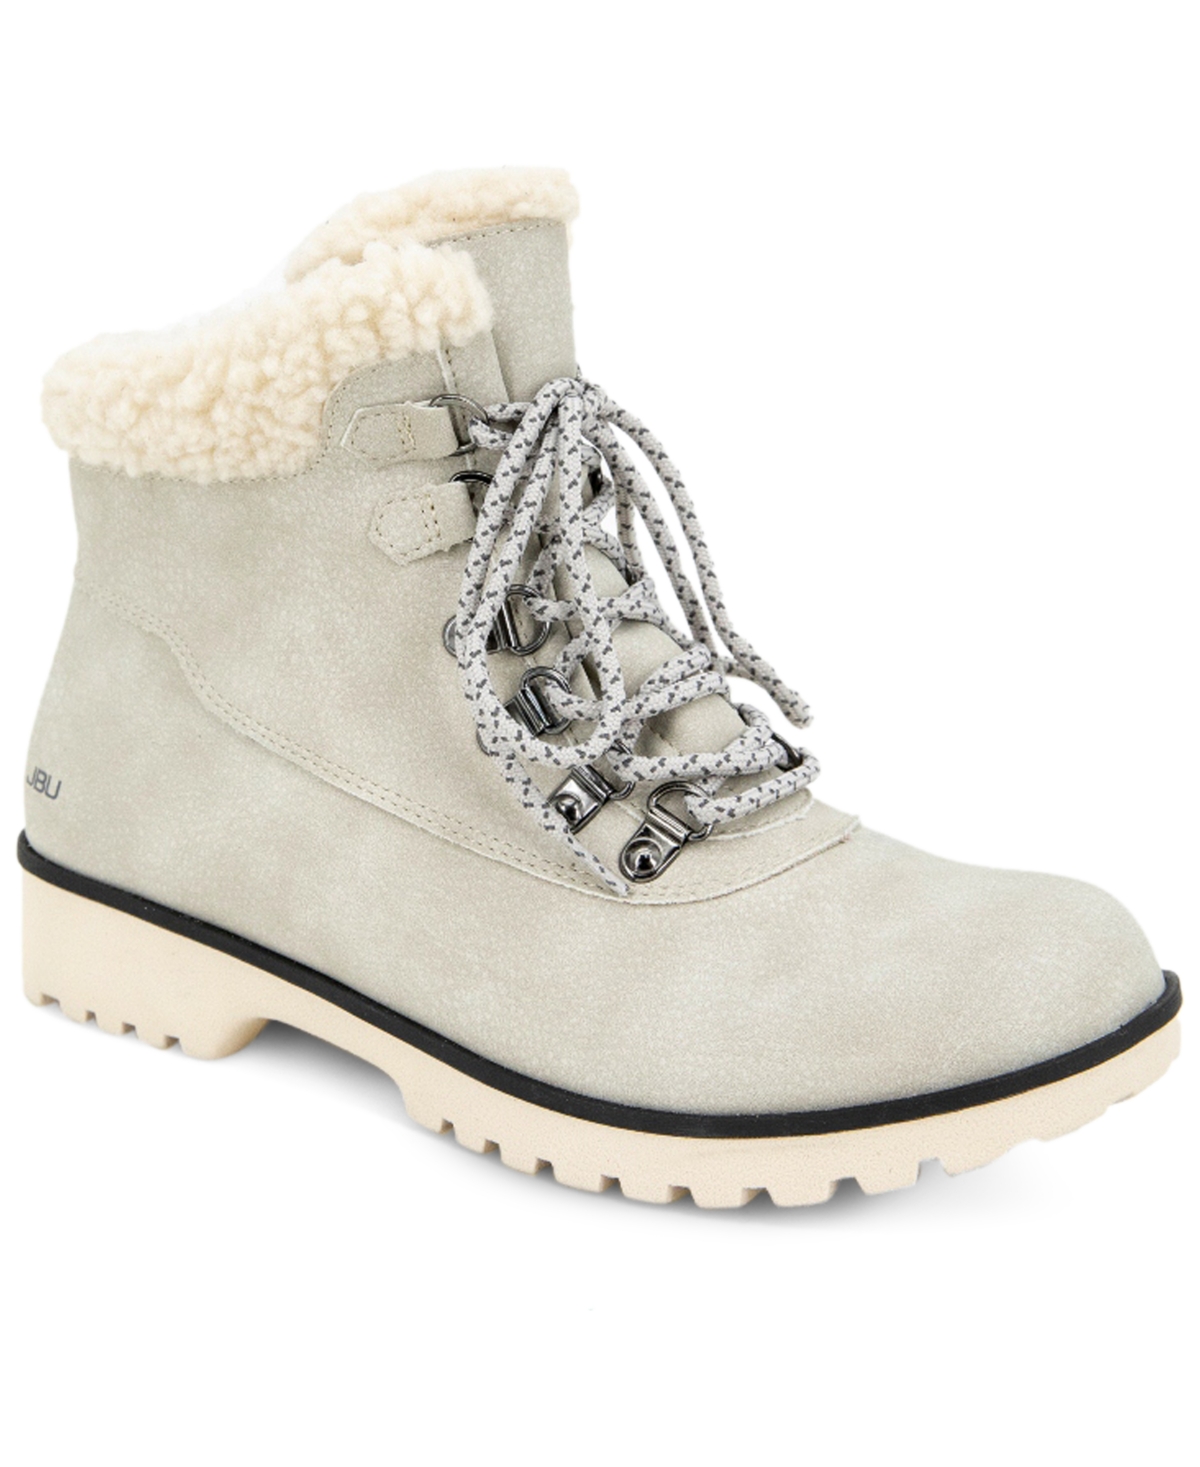 Women's Blue Creek Water-Resistant Lace-Up Booties - Stone White